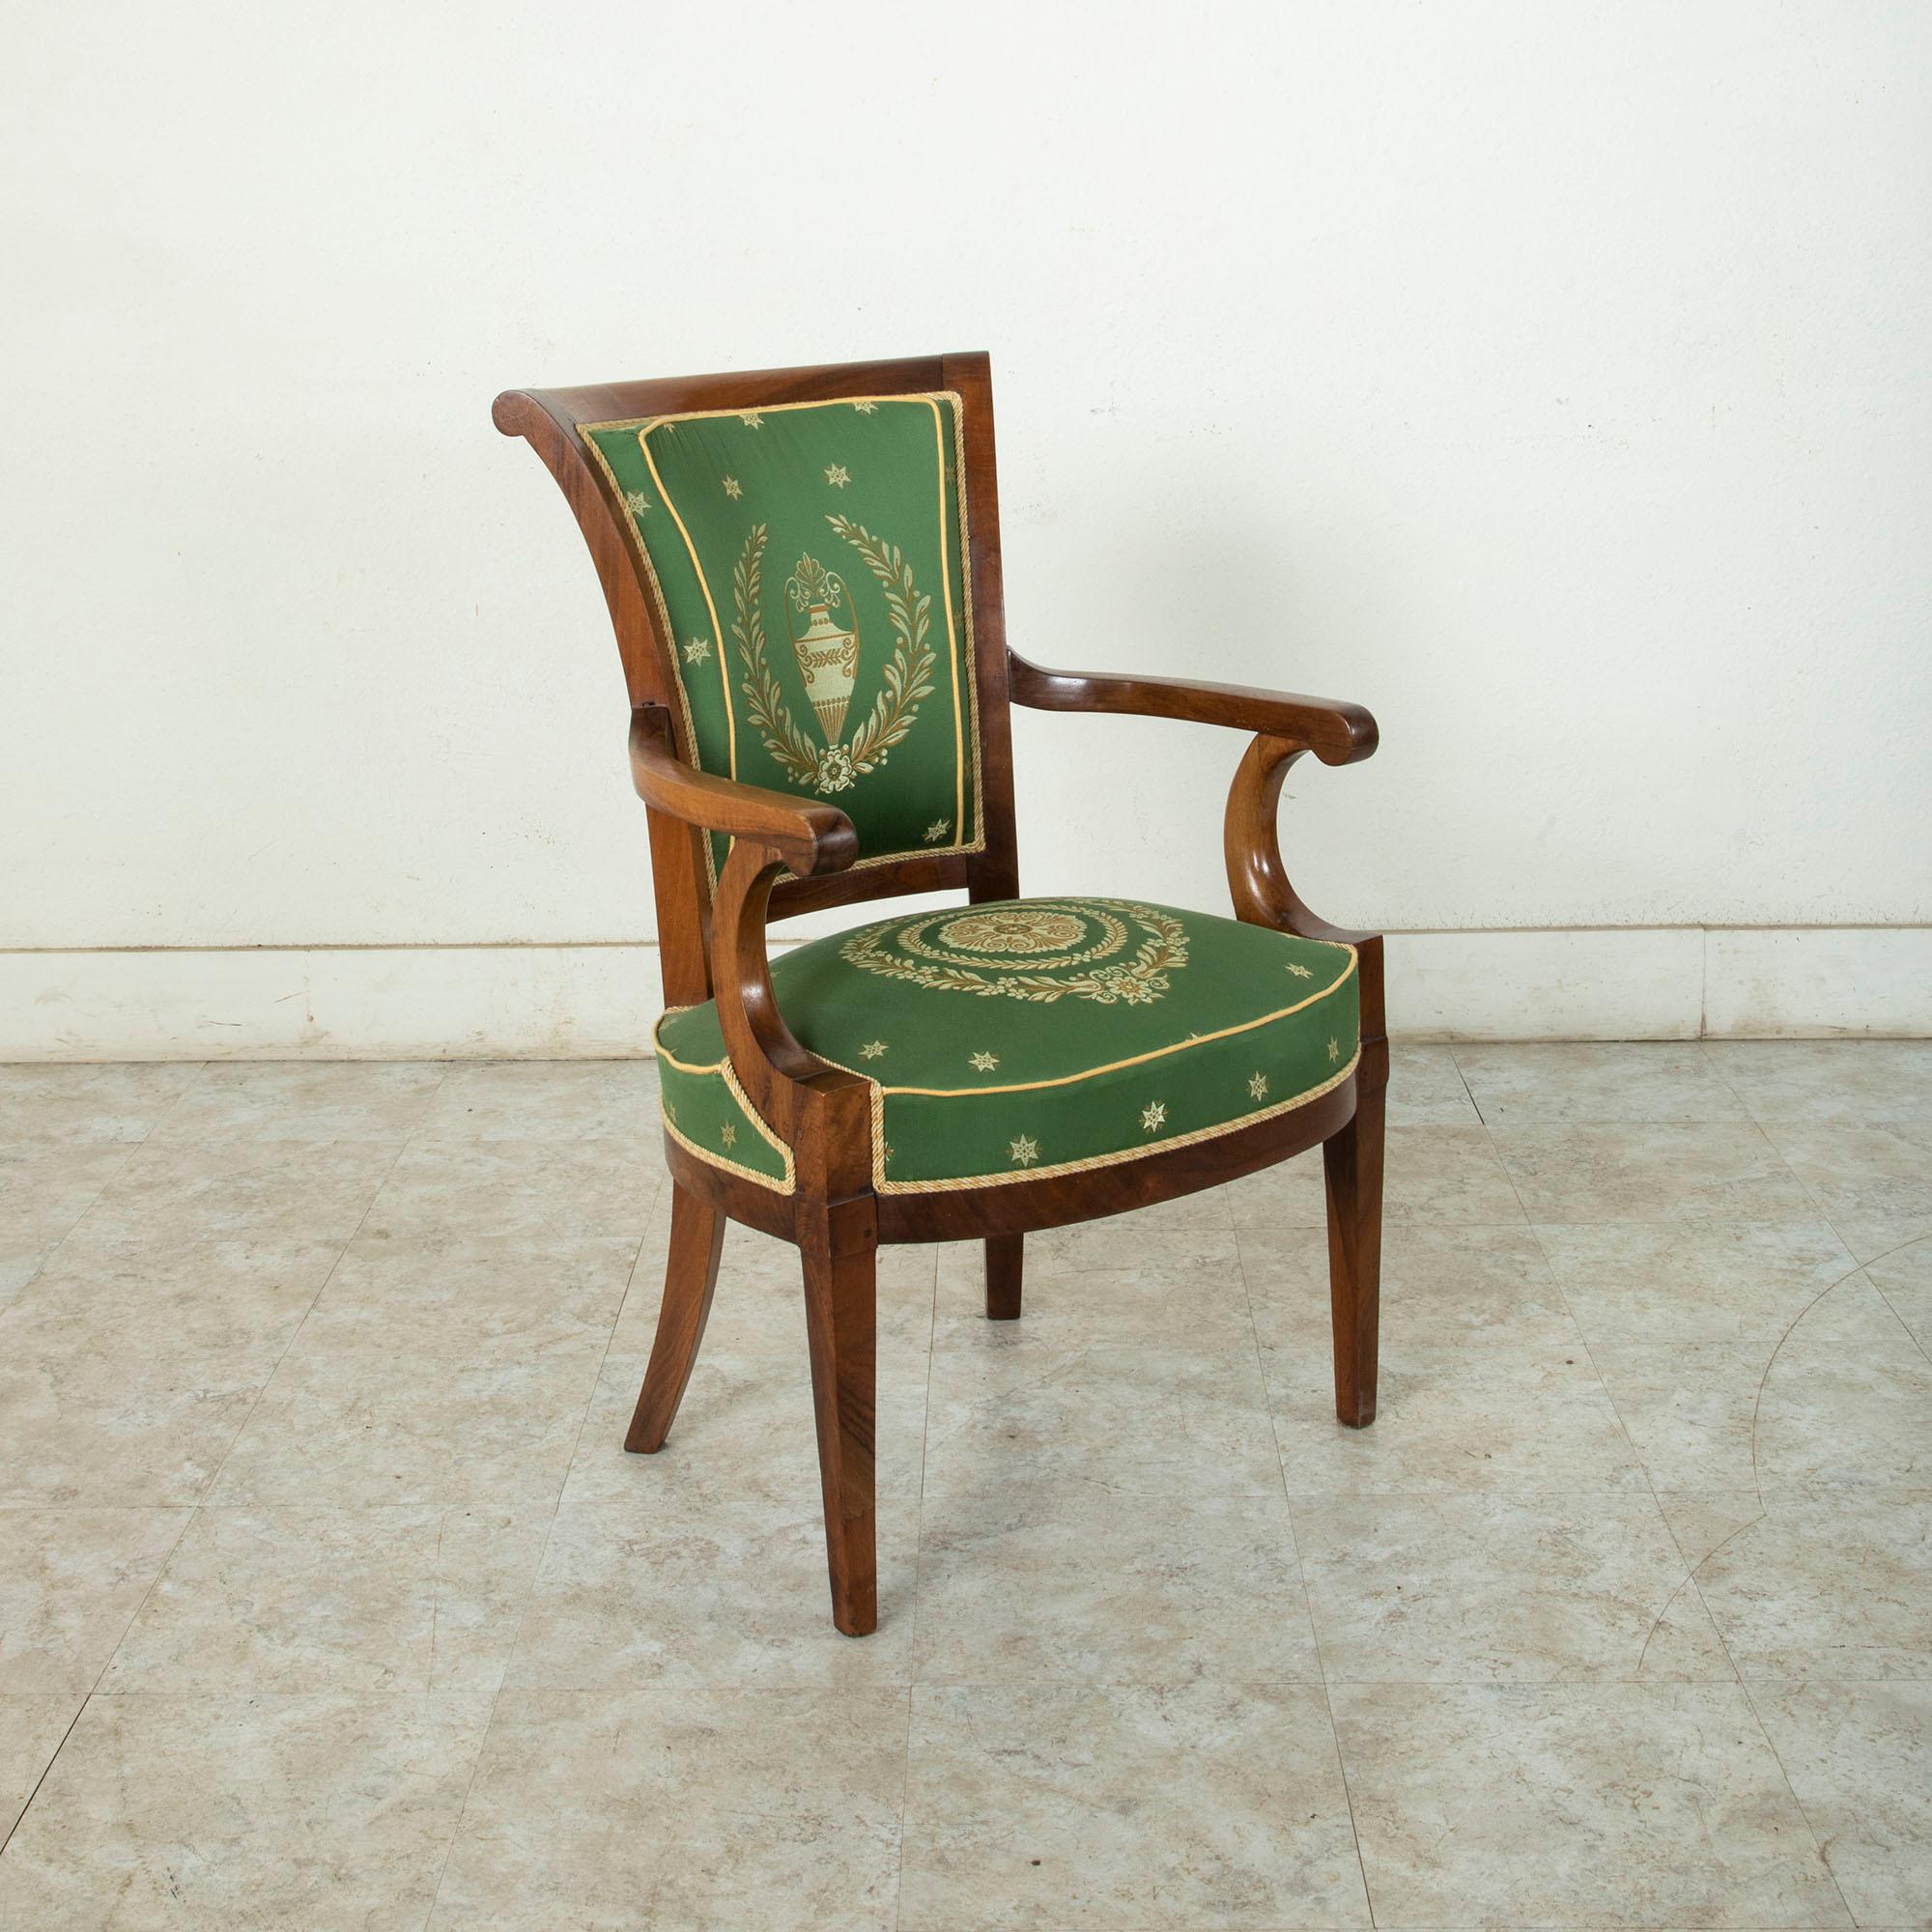 From a chateau in Normandy, France, this late 18th century Directoire period hand pegged mahogany armchair features green silk upholstery detailed with embroidered Directoire embellishments of laurels, stars, and an urn on the seat back. The seat